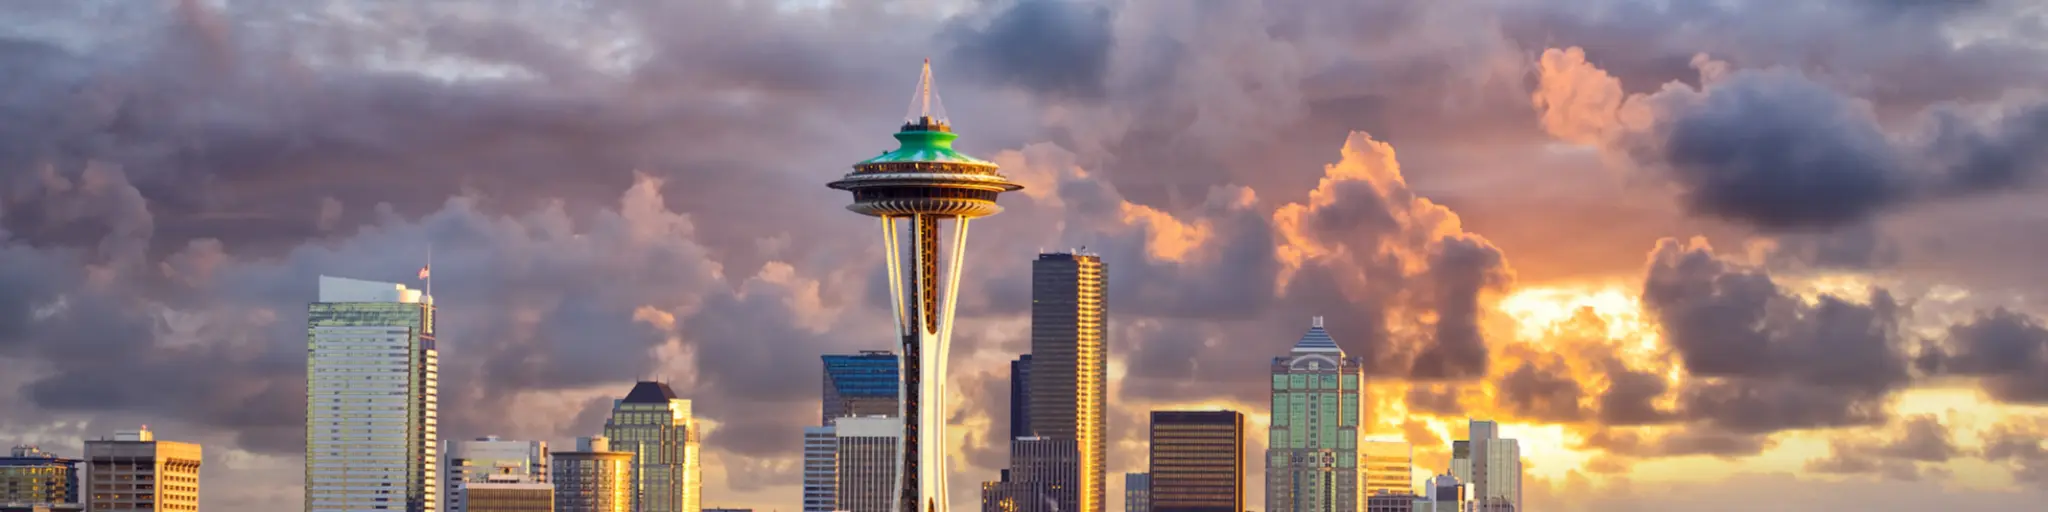 The futuristic Space Needle dominates the Seattle skyline on a cloudy day